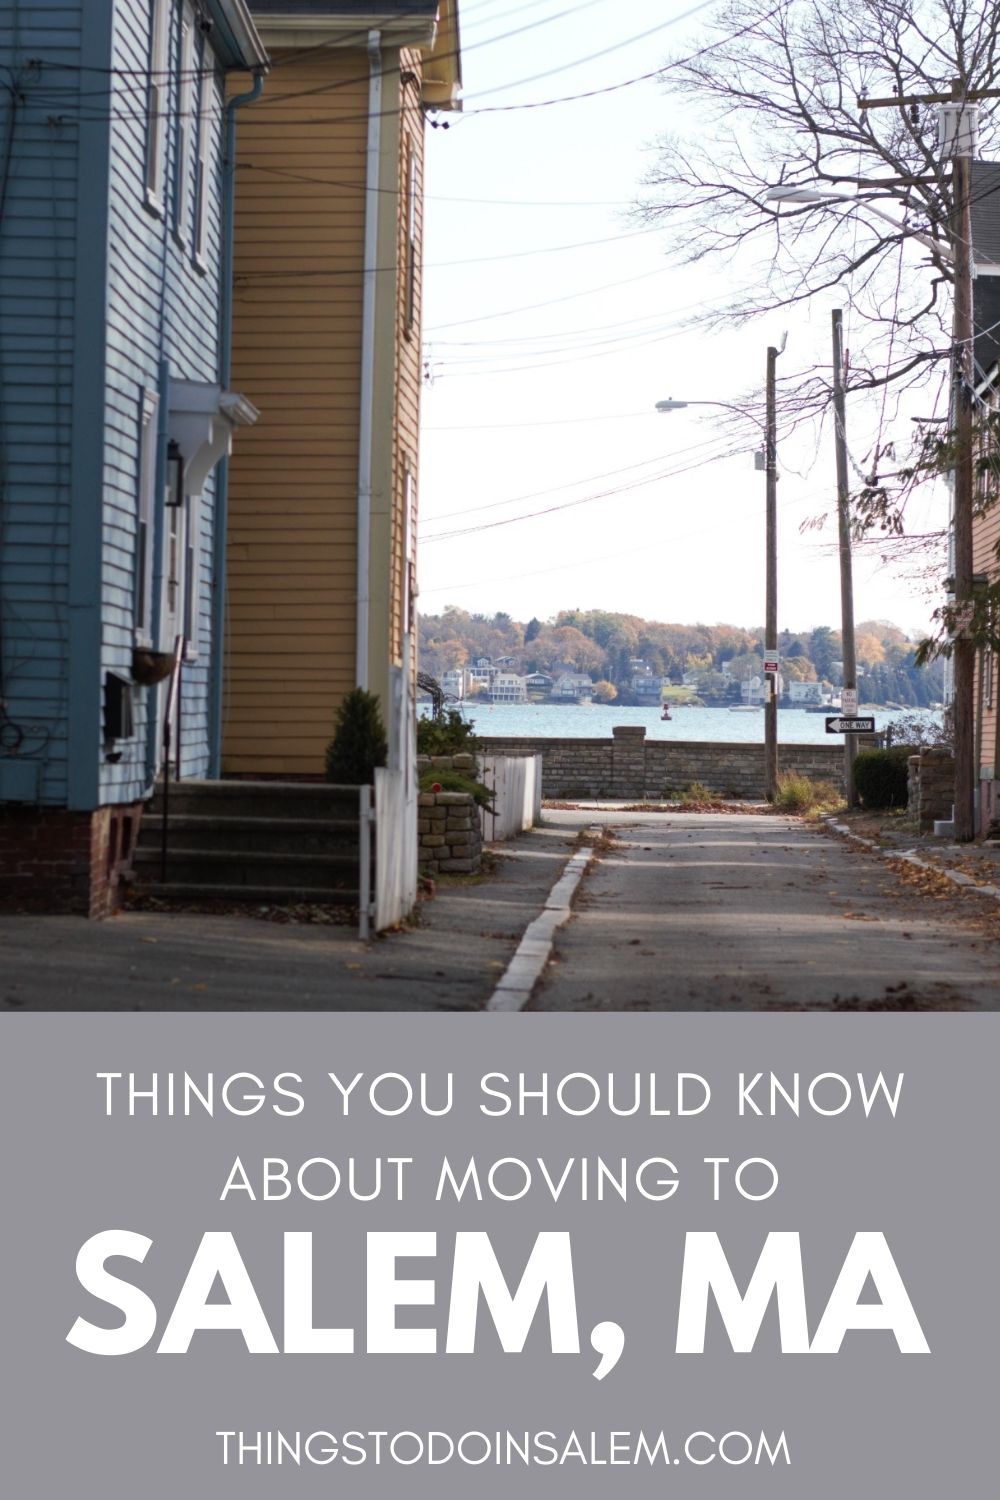 things to do in salem, things you should know about moving to salem ma